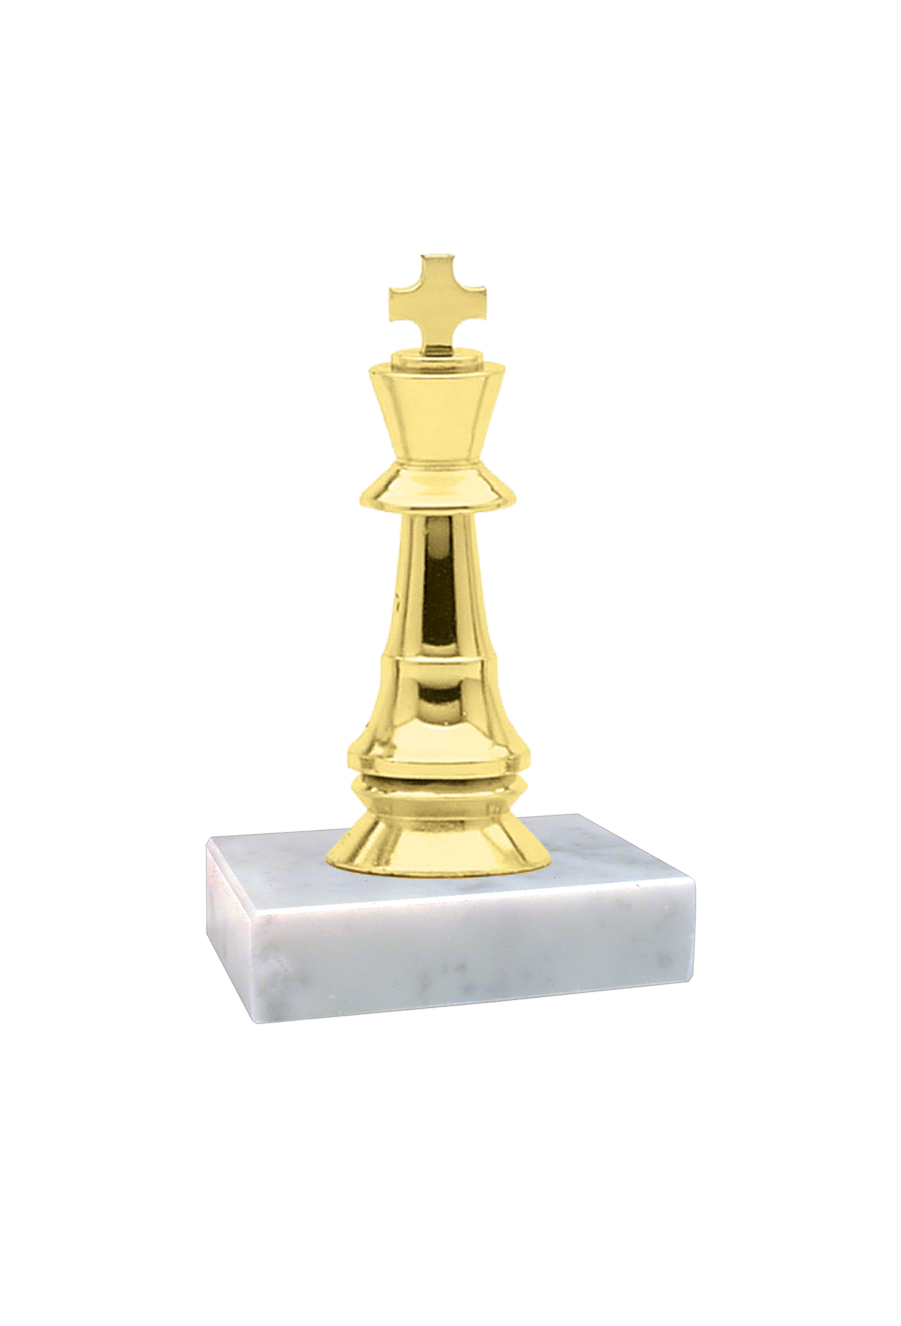 Chess Trophies Resin Chess Games Award 2 sizes FREE Engraving 